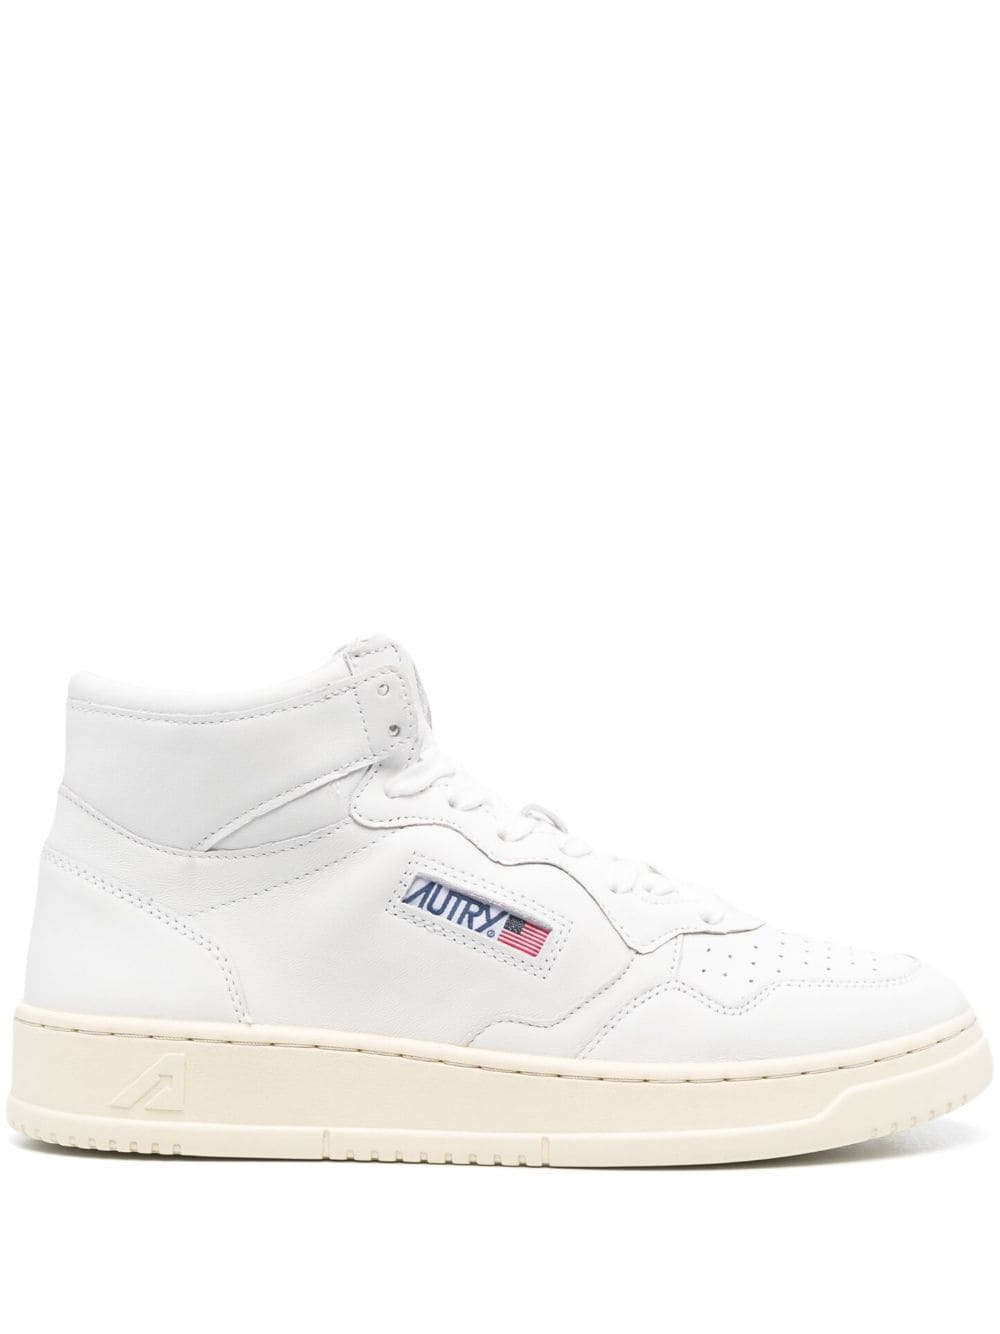 Autry Medalist Mid high-top leather sneakers - White von Autry